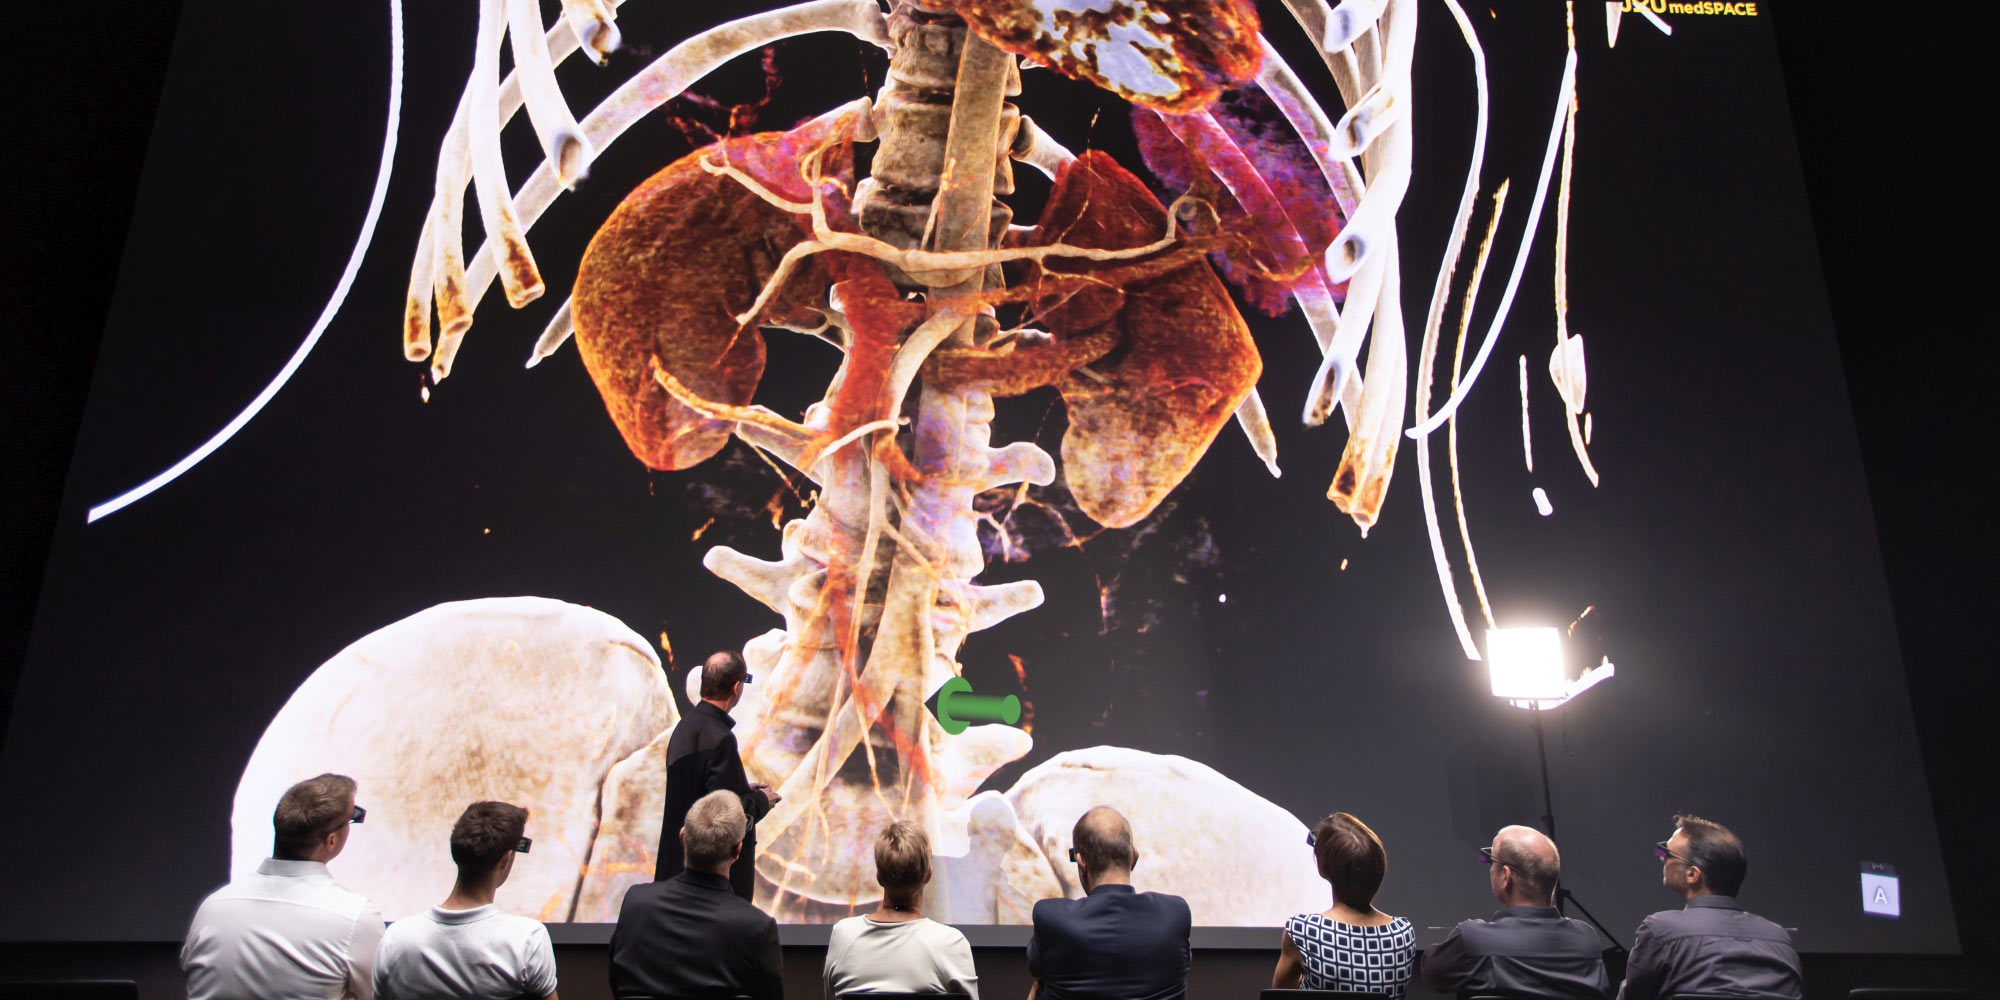 The blood supply of a living person, freely rotatable and zoomable, in unimagined detail from head to toe: "Virtual Anatomy" lets you see the previously impossible